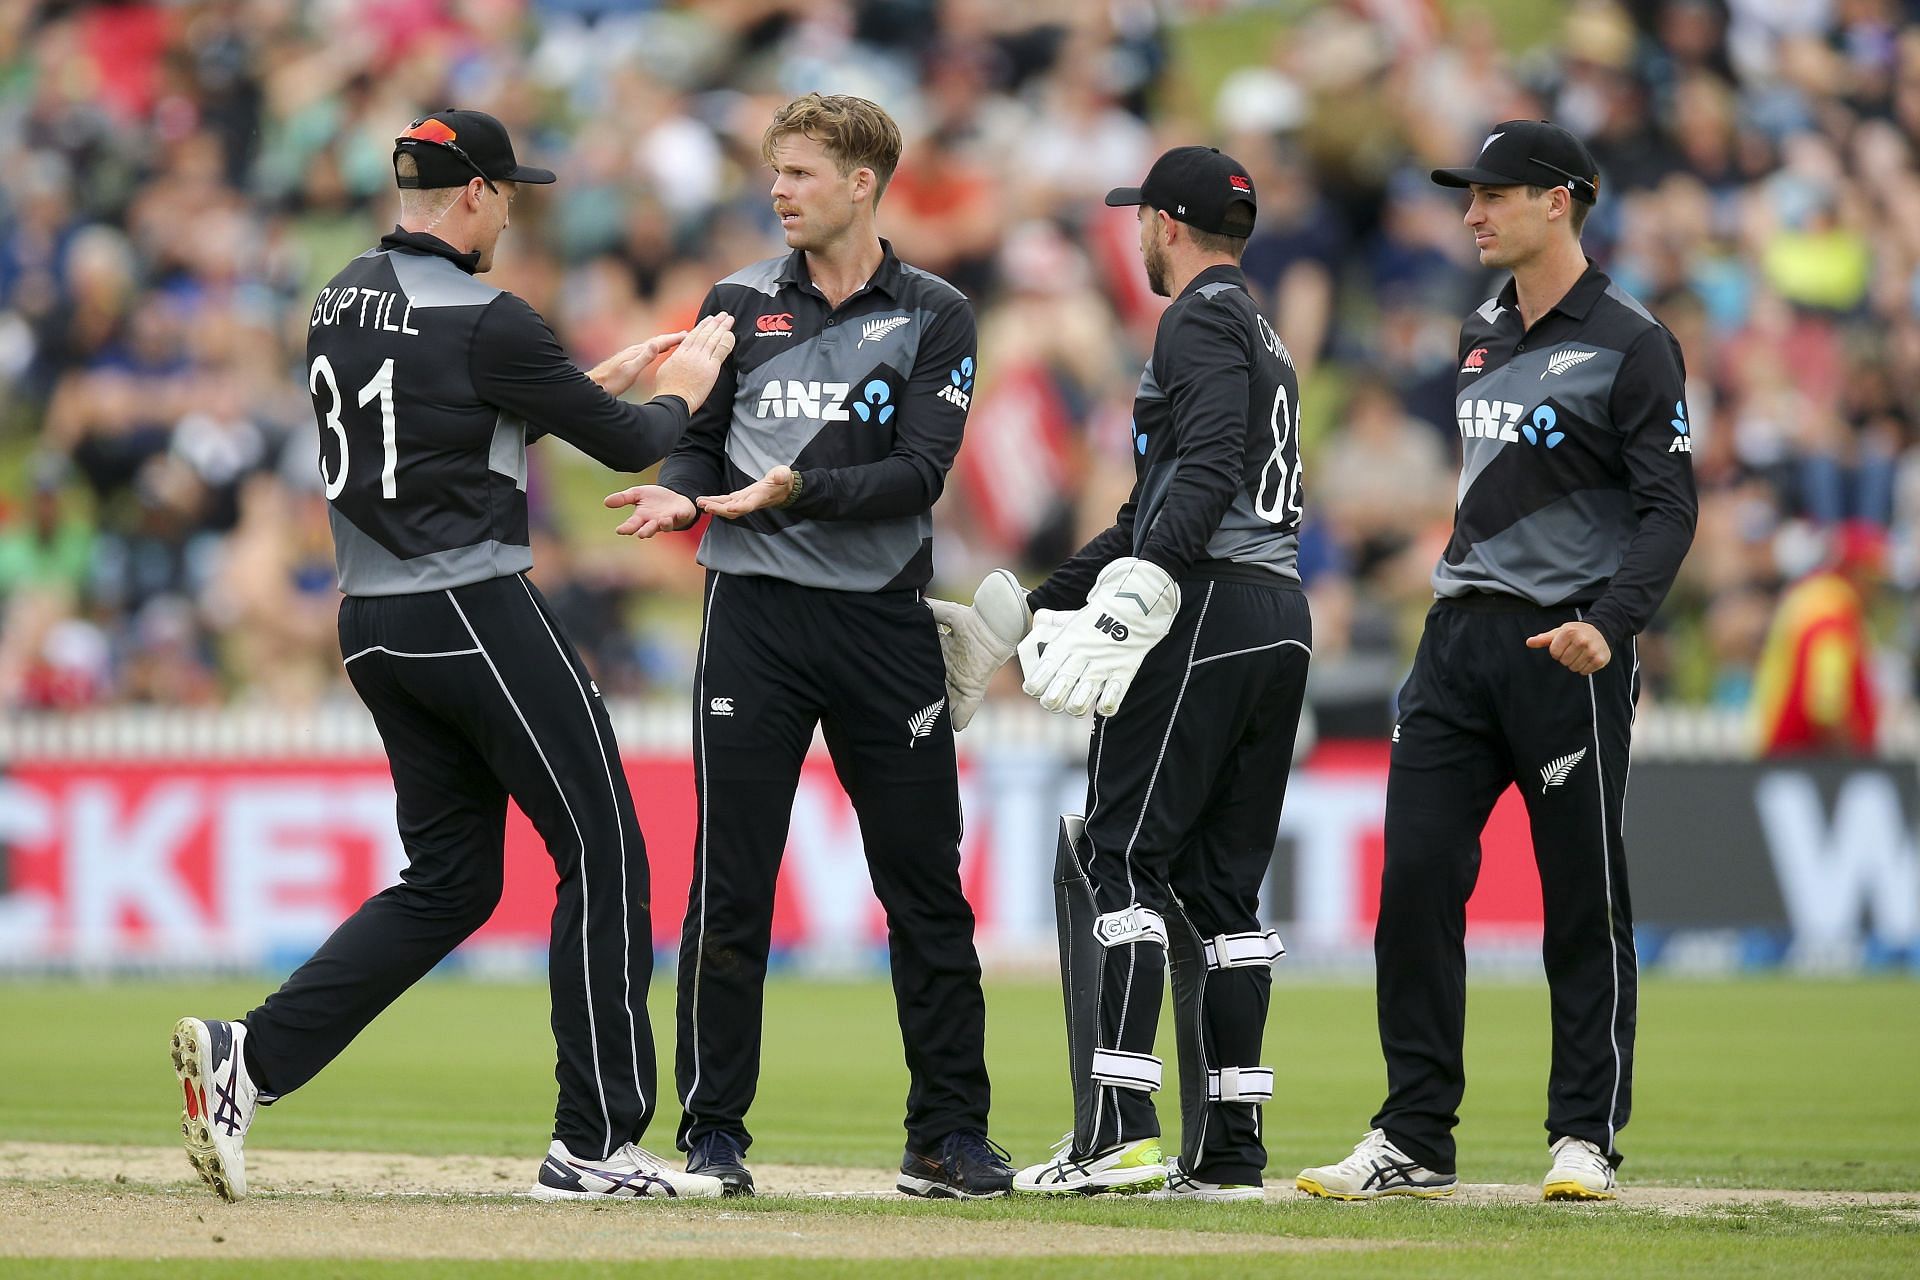 Can New Zealand add the T20 World Cup to their kitty?